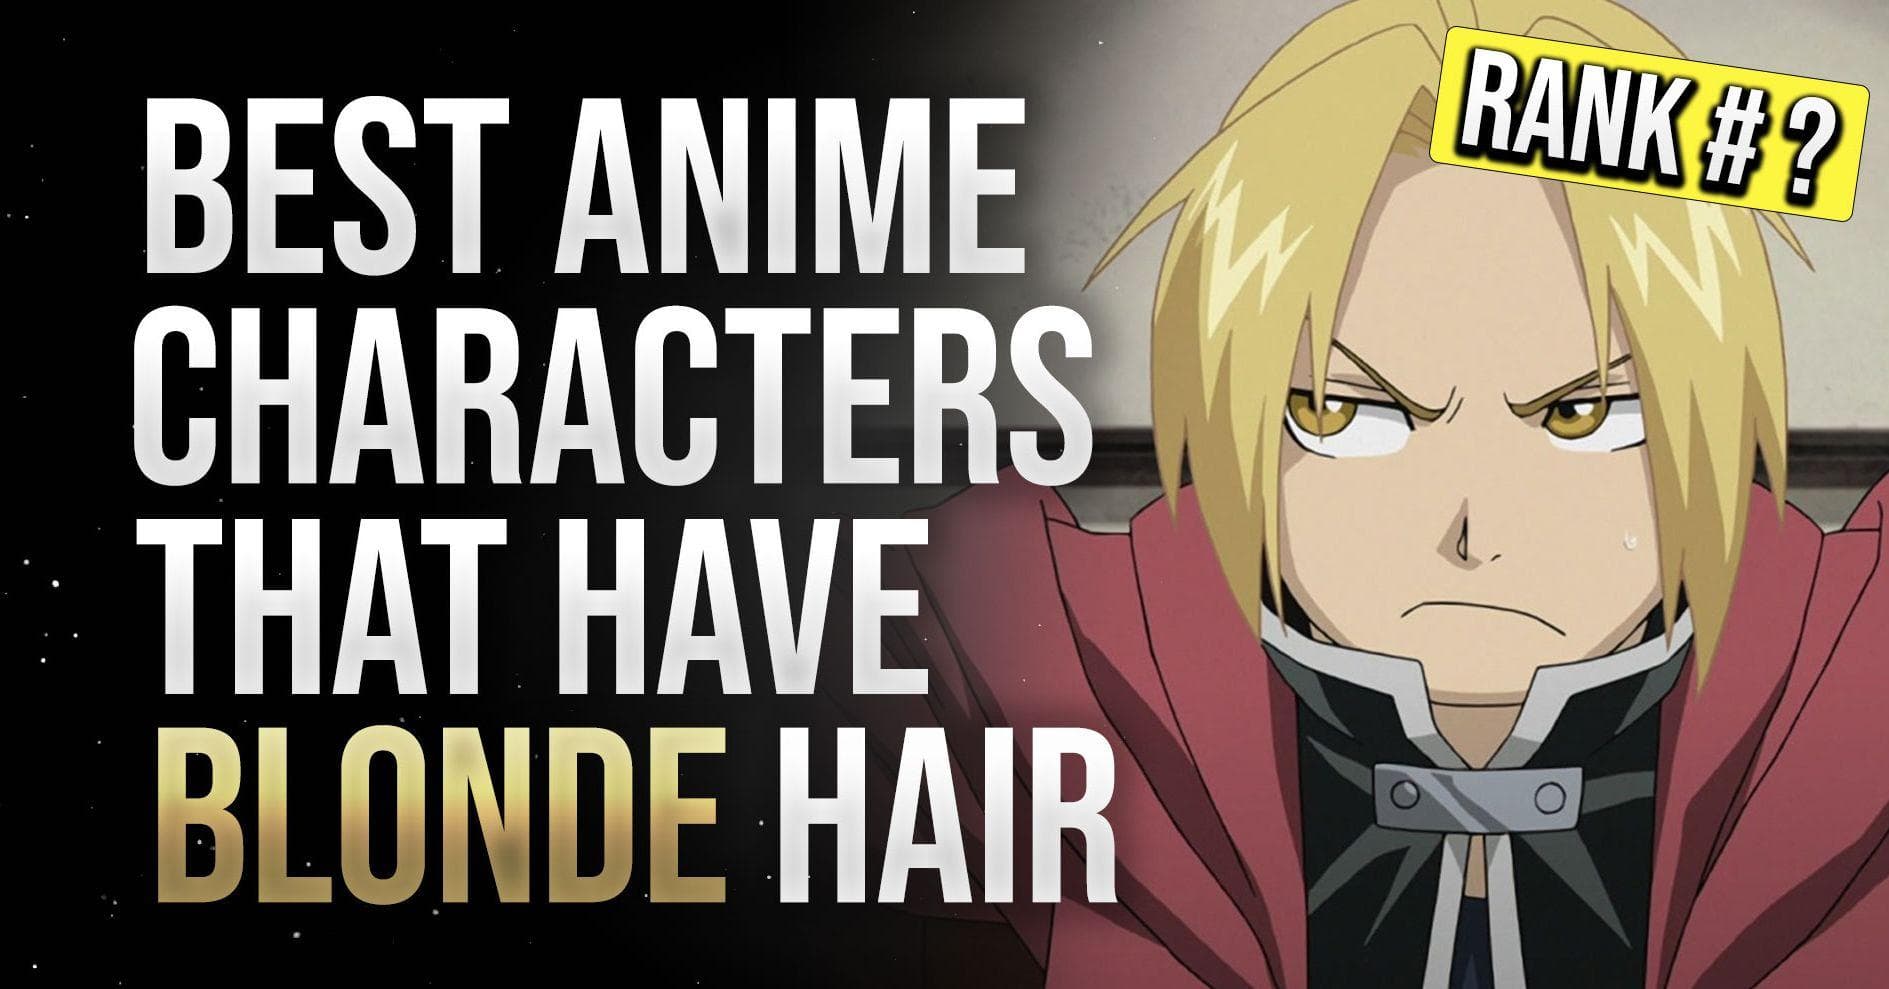 The 10 Best Male Anime Hairstyles Of All Time, Ranked